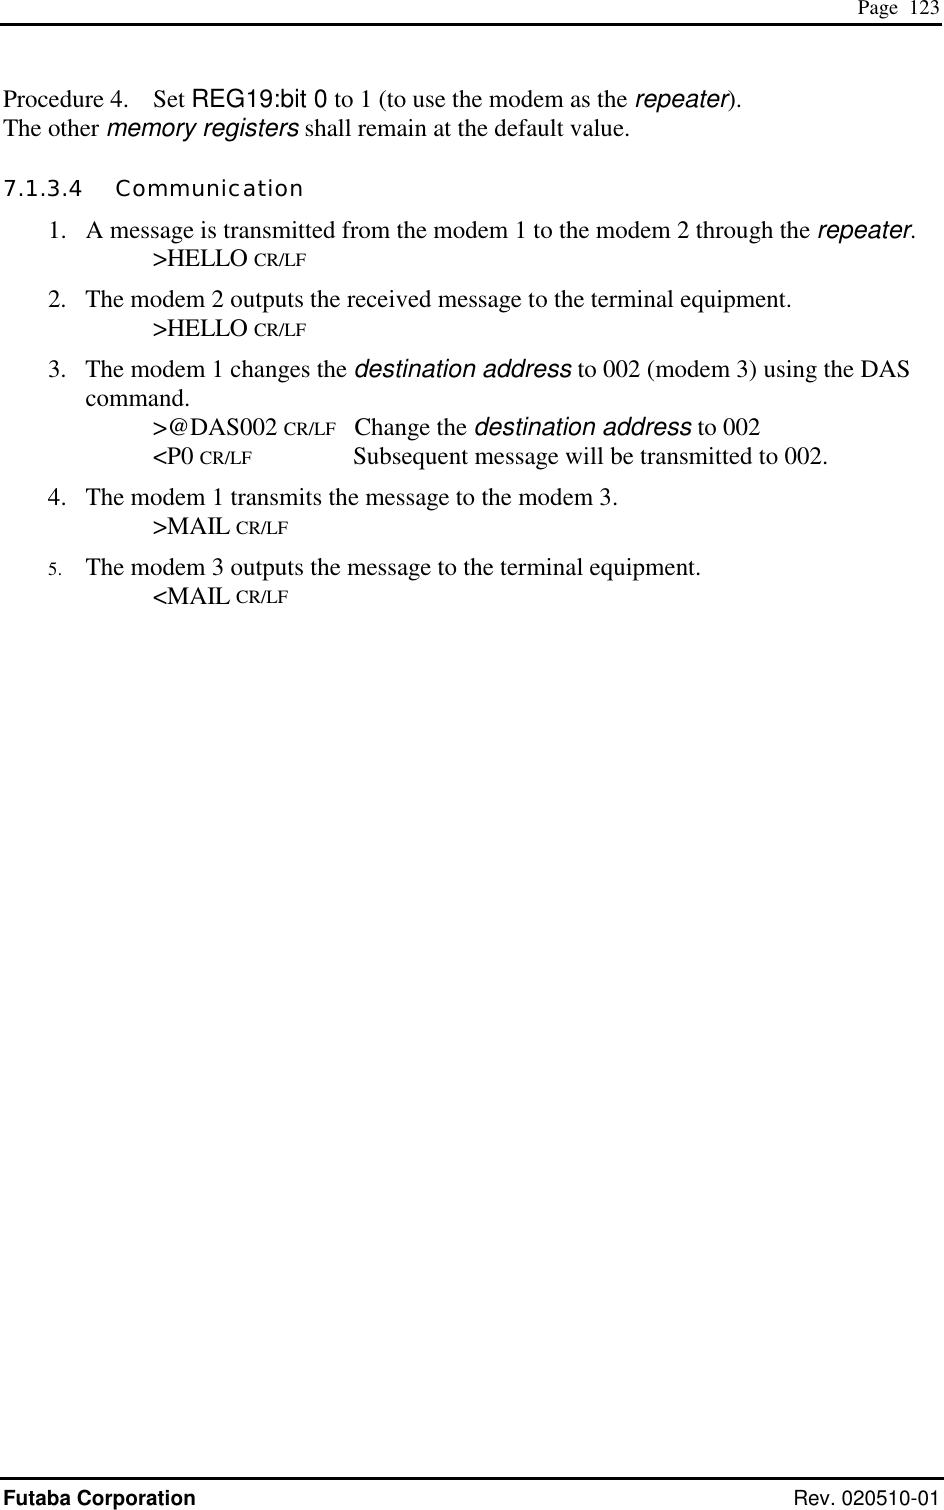  Page  123 Futaba Corporation Rev. 020510-01 Procedure 4.  Set REG19:bit 0 to 1 (to use the modem as the repeater). The other memory registers shall remain at the default value. 7.1.3.4   Communication 1.  A message is transmitted from the modem 1 to the modem 2 through the repeater.    &gt;HELLO CR/LF 2.  The modem 2 outputs the received message to the terminal equipment.    &gt;HELLO CR/LF 3.  The modem 1 changes the destination address to 002 (modem 3) using the DAS command.    &gt;@DAS002 CR/LF   Change the destination address to 002    &lt;P0 CR/LF          Subsequent message will be transmitted to 002. 4.  The modem 1 transmits the message to the modem 3.    &gt;MAIL CR/LF 5.  The modem 3 outputs the message to the terminal equipment.    &lt;MAIL CR/LF 